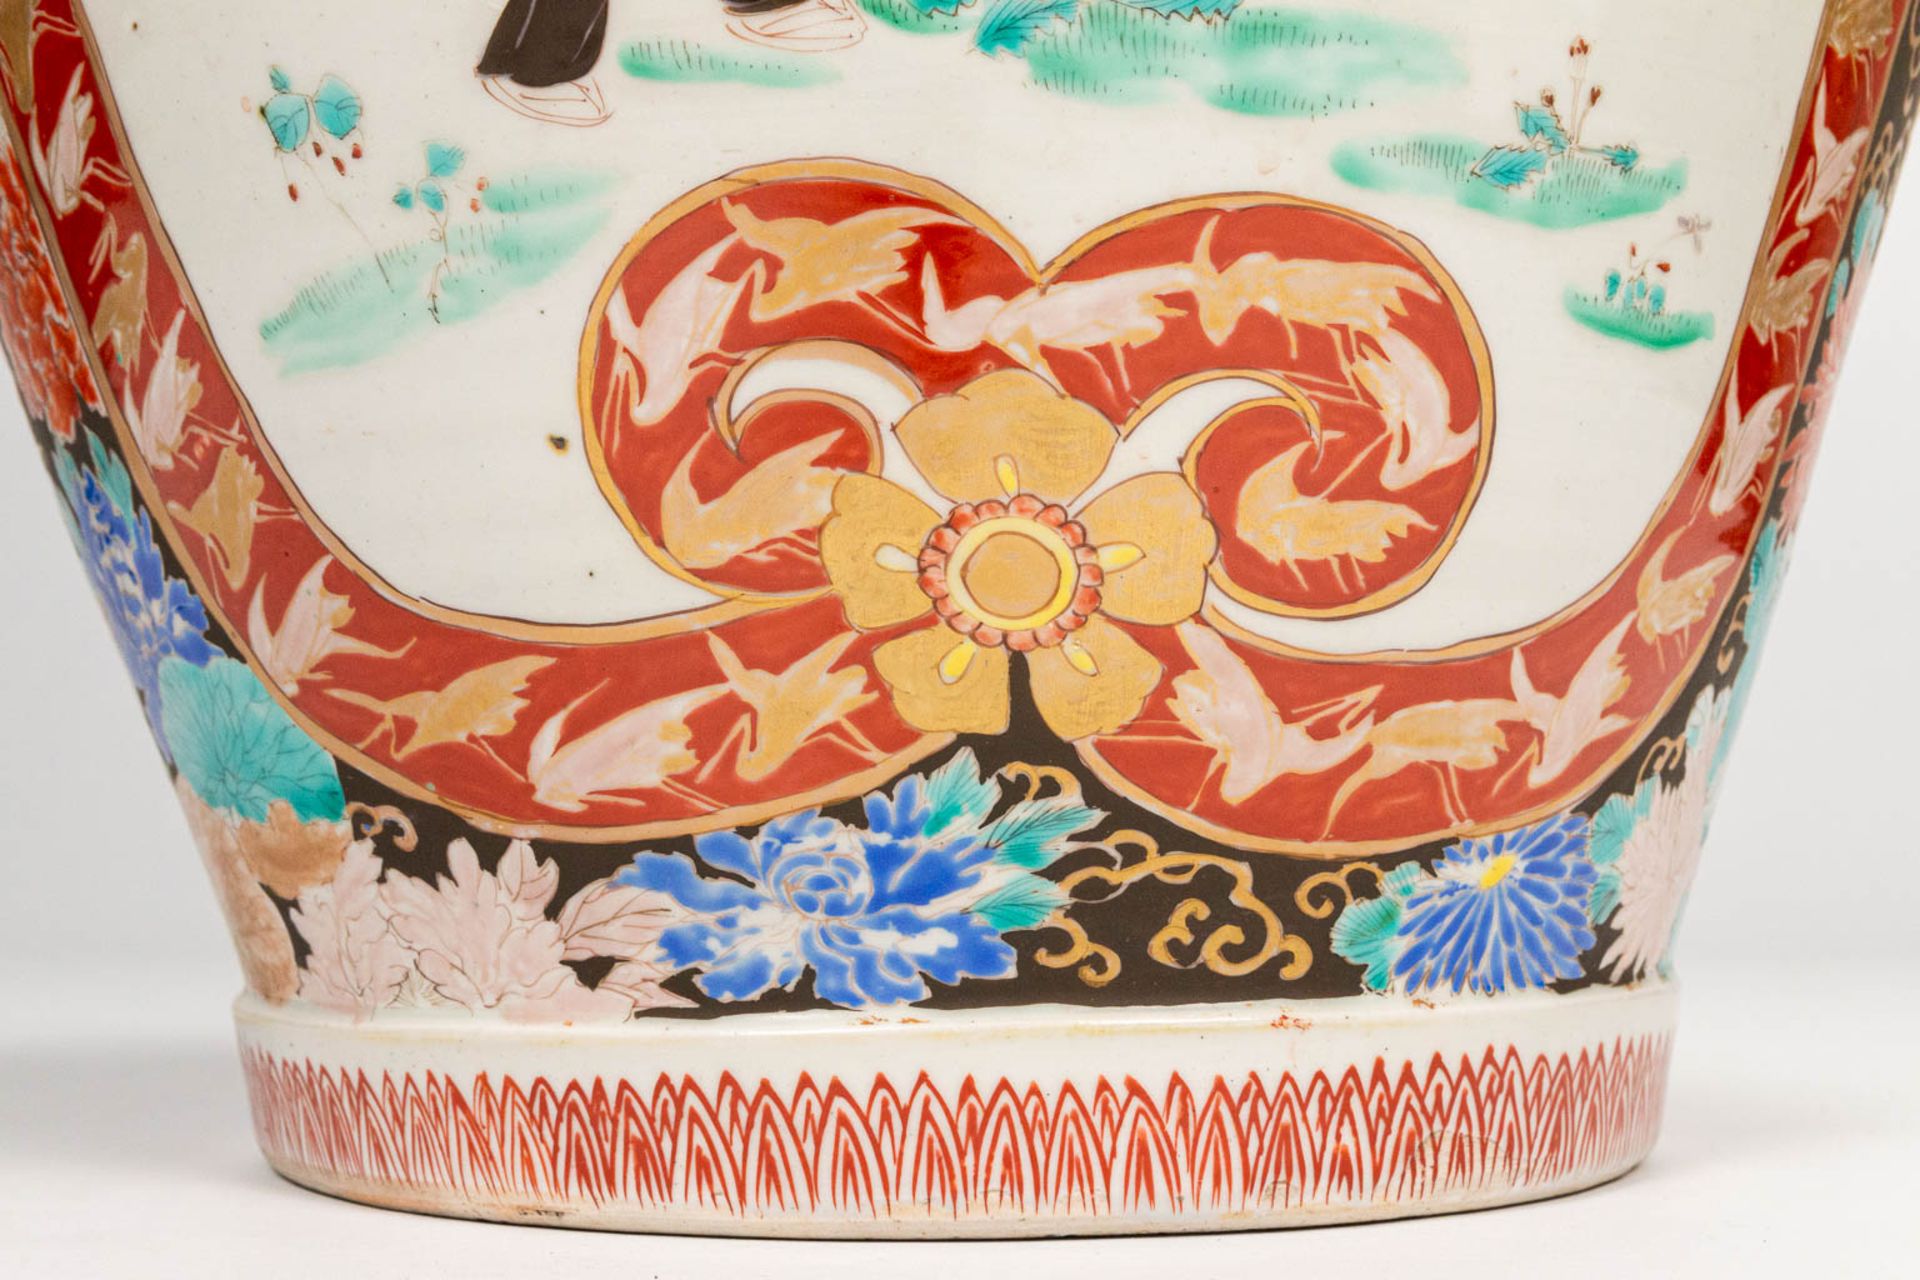 A large Imari display vase made of hand-painted porcelain in Japan. 19th/20th century. (60 x 42 cm) - Image 13 of 21